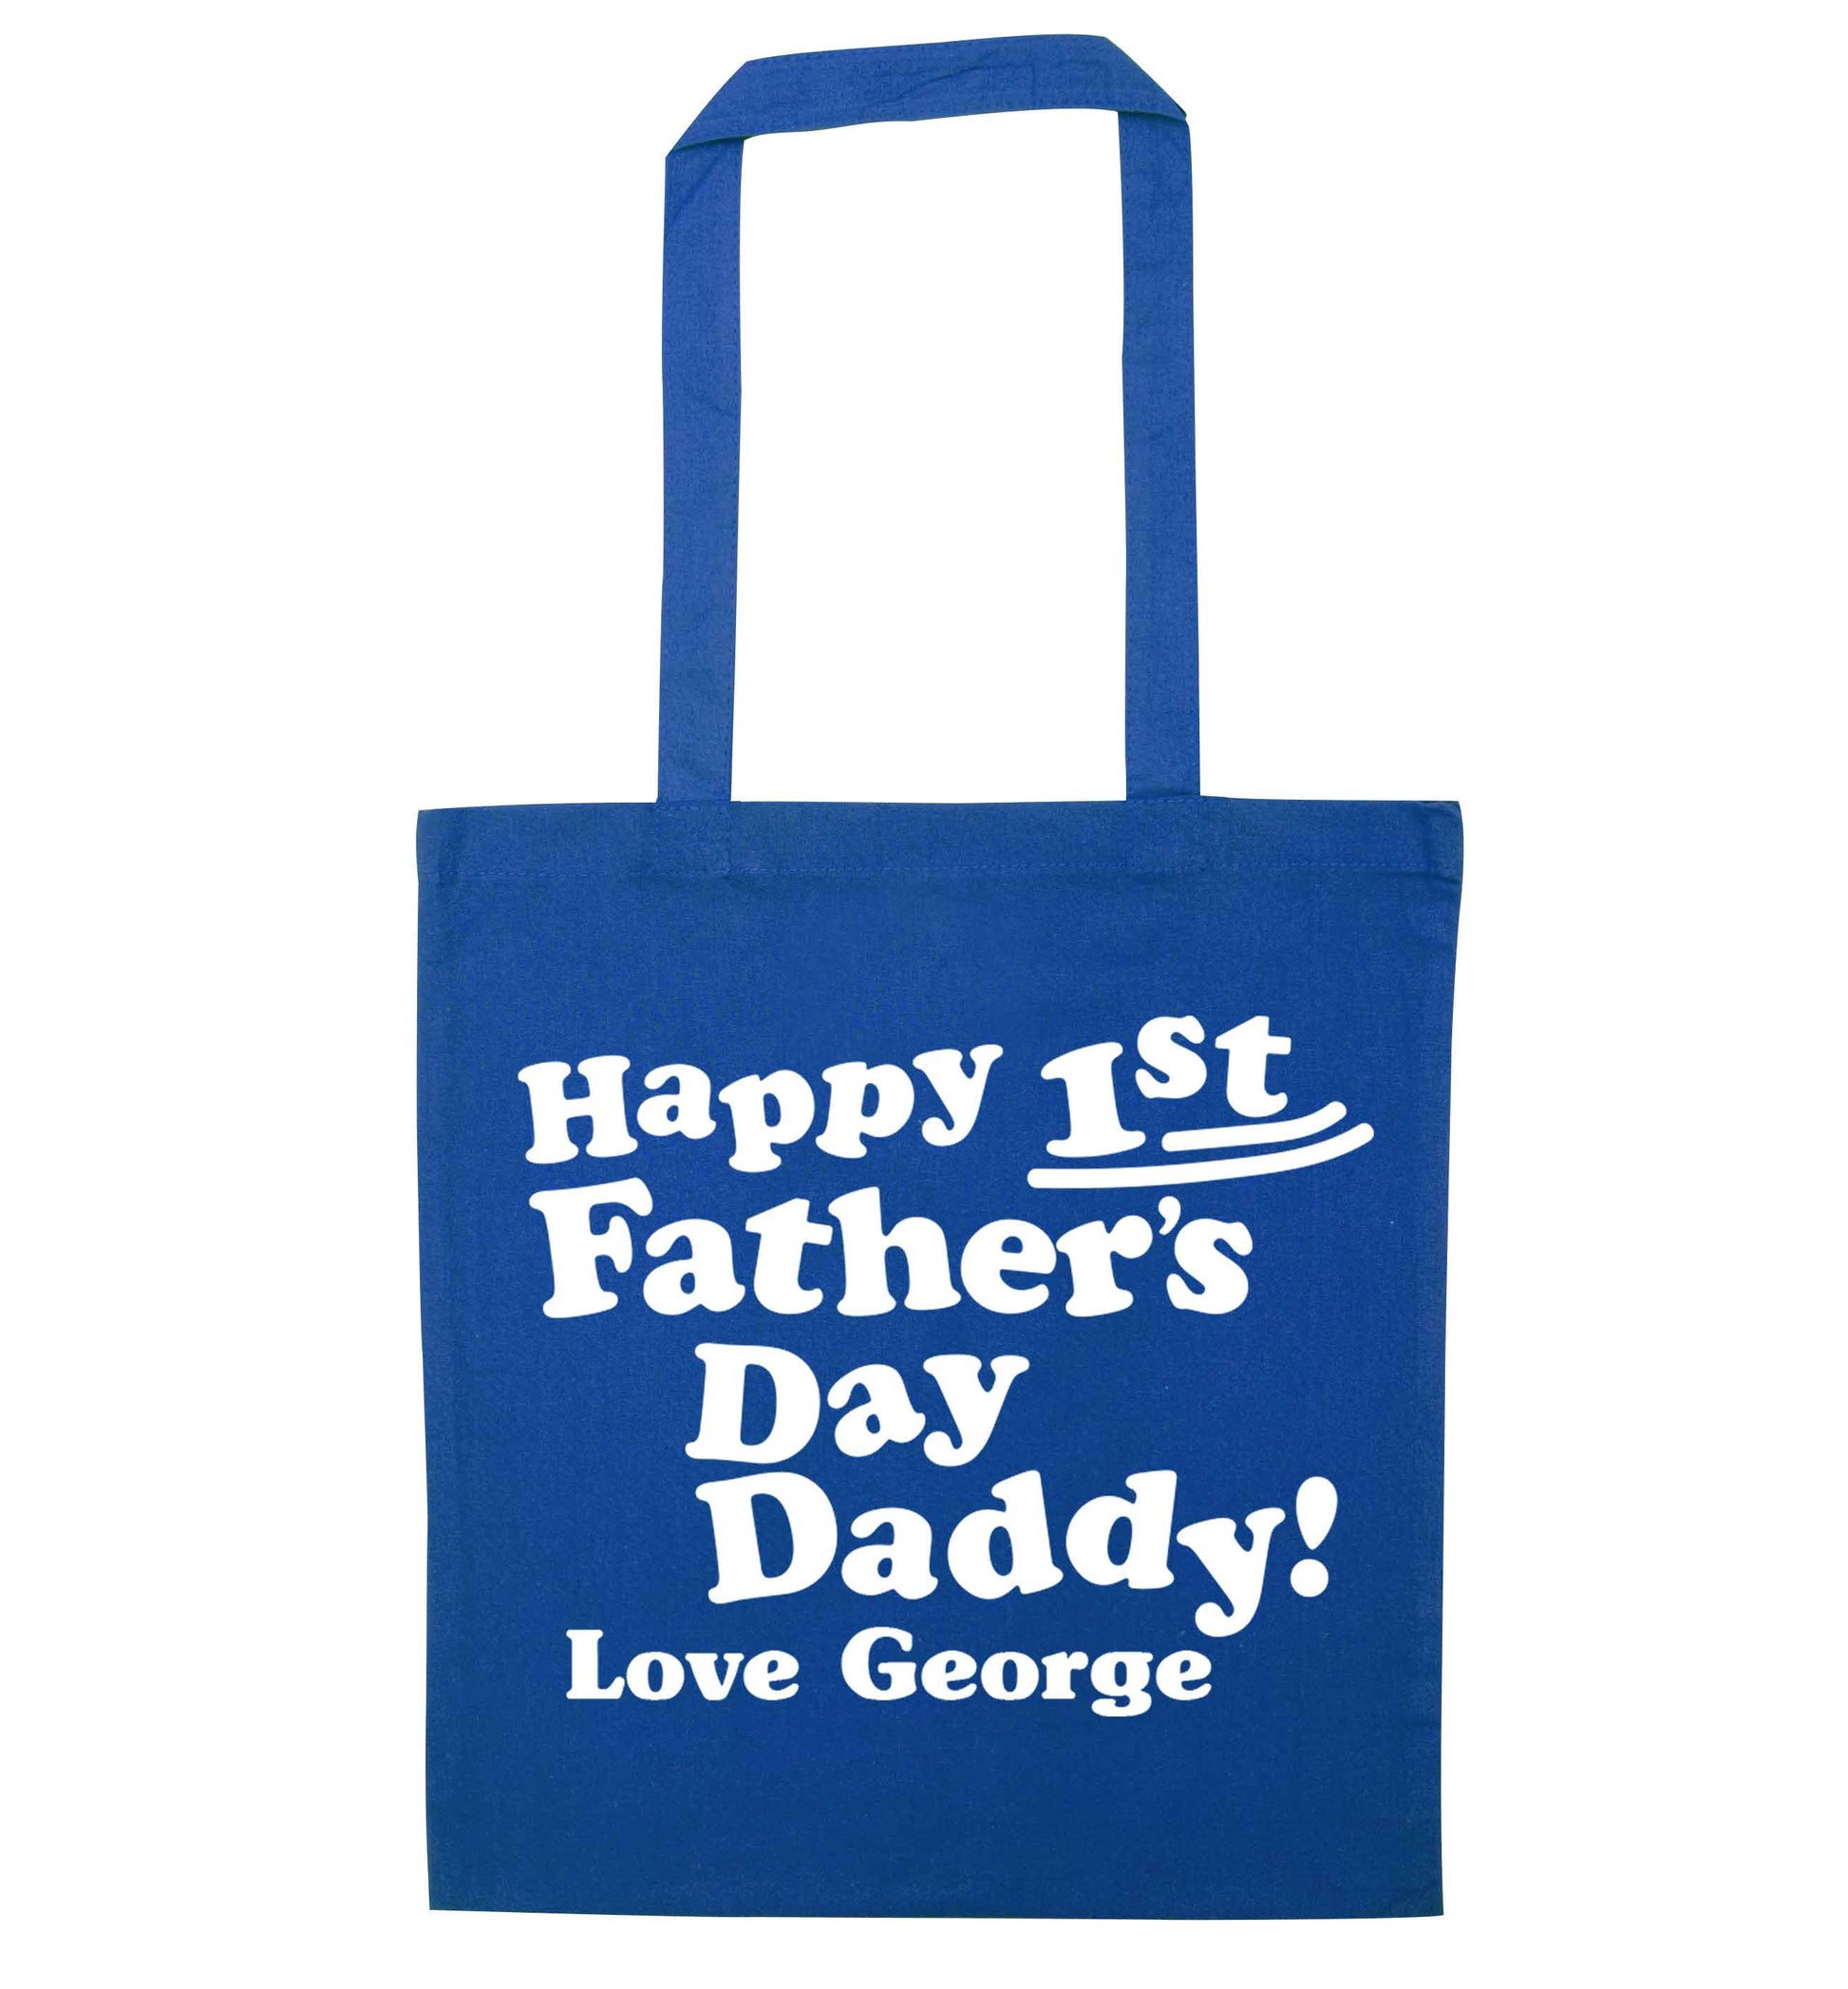 Happy first Fathers Day daddy love personalised blue tote bag